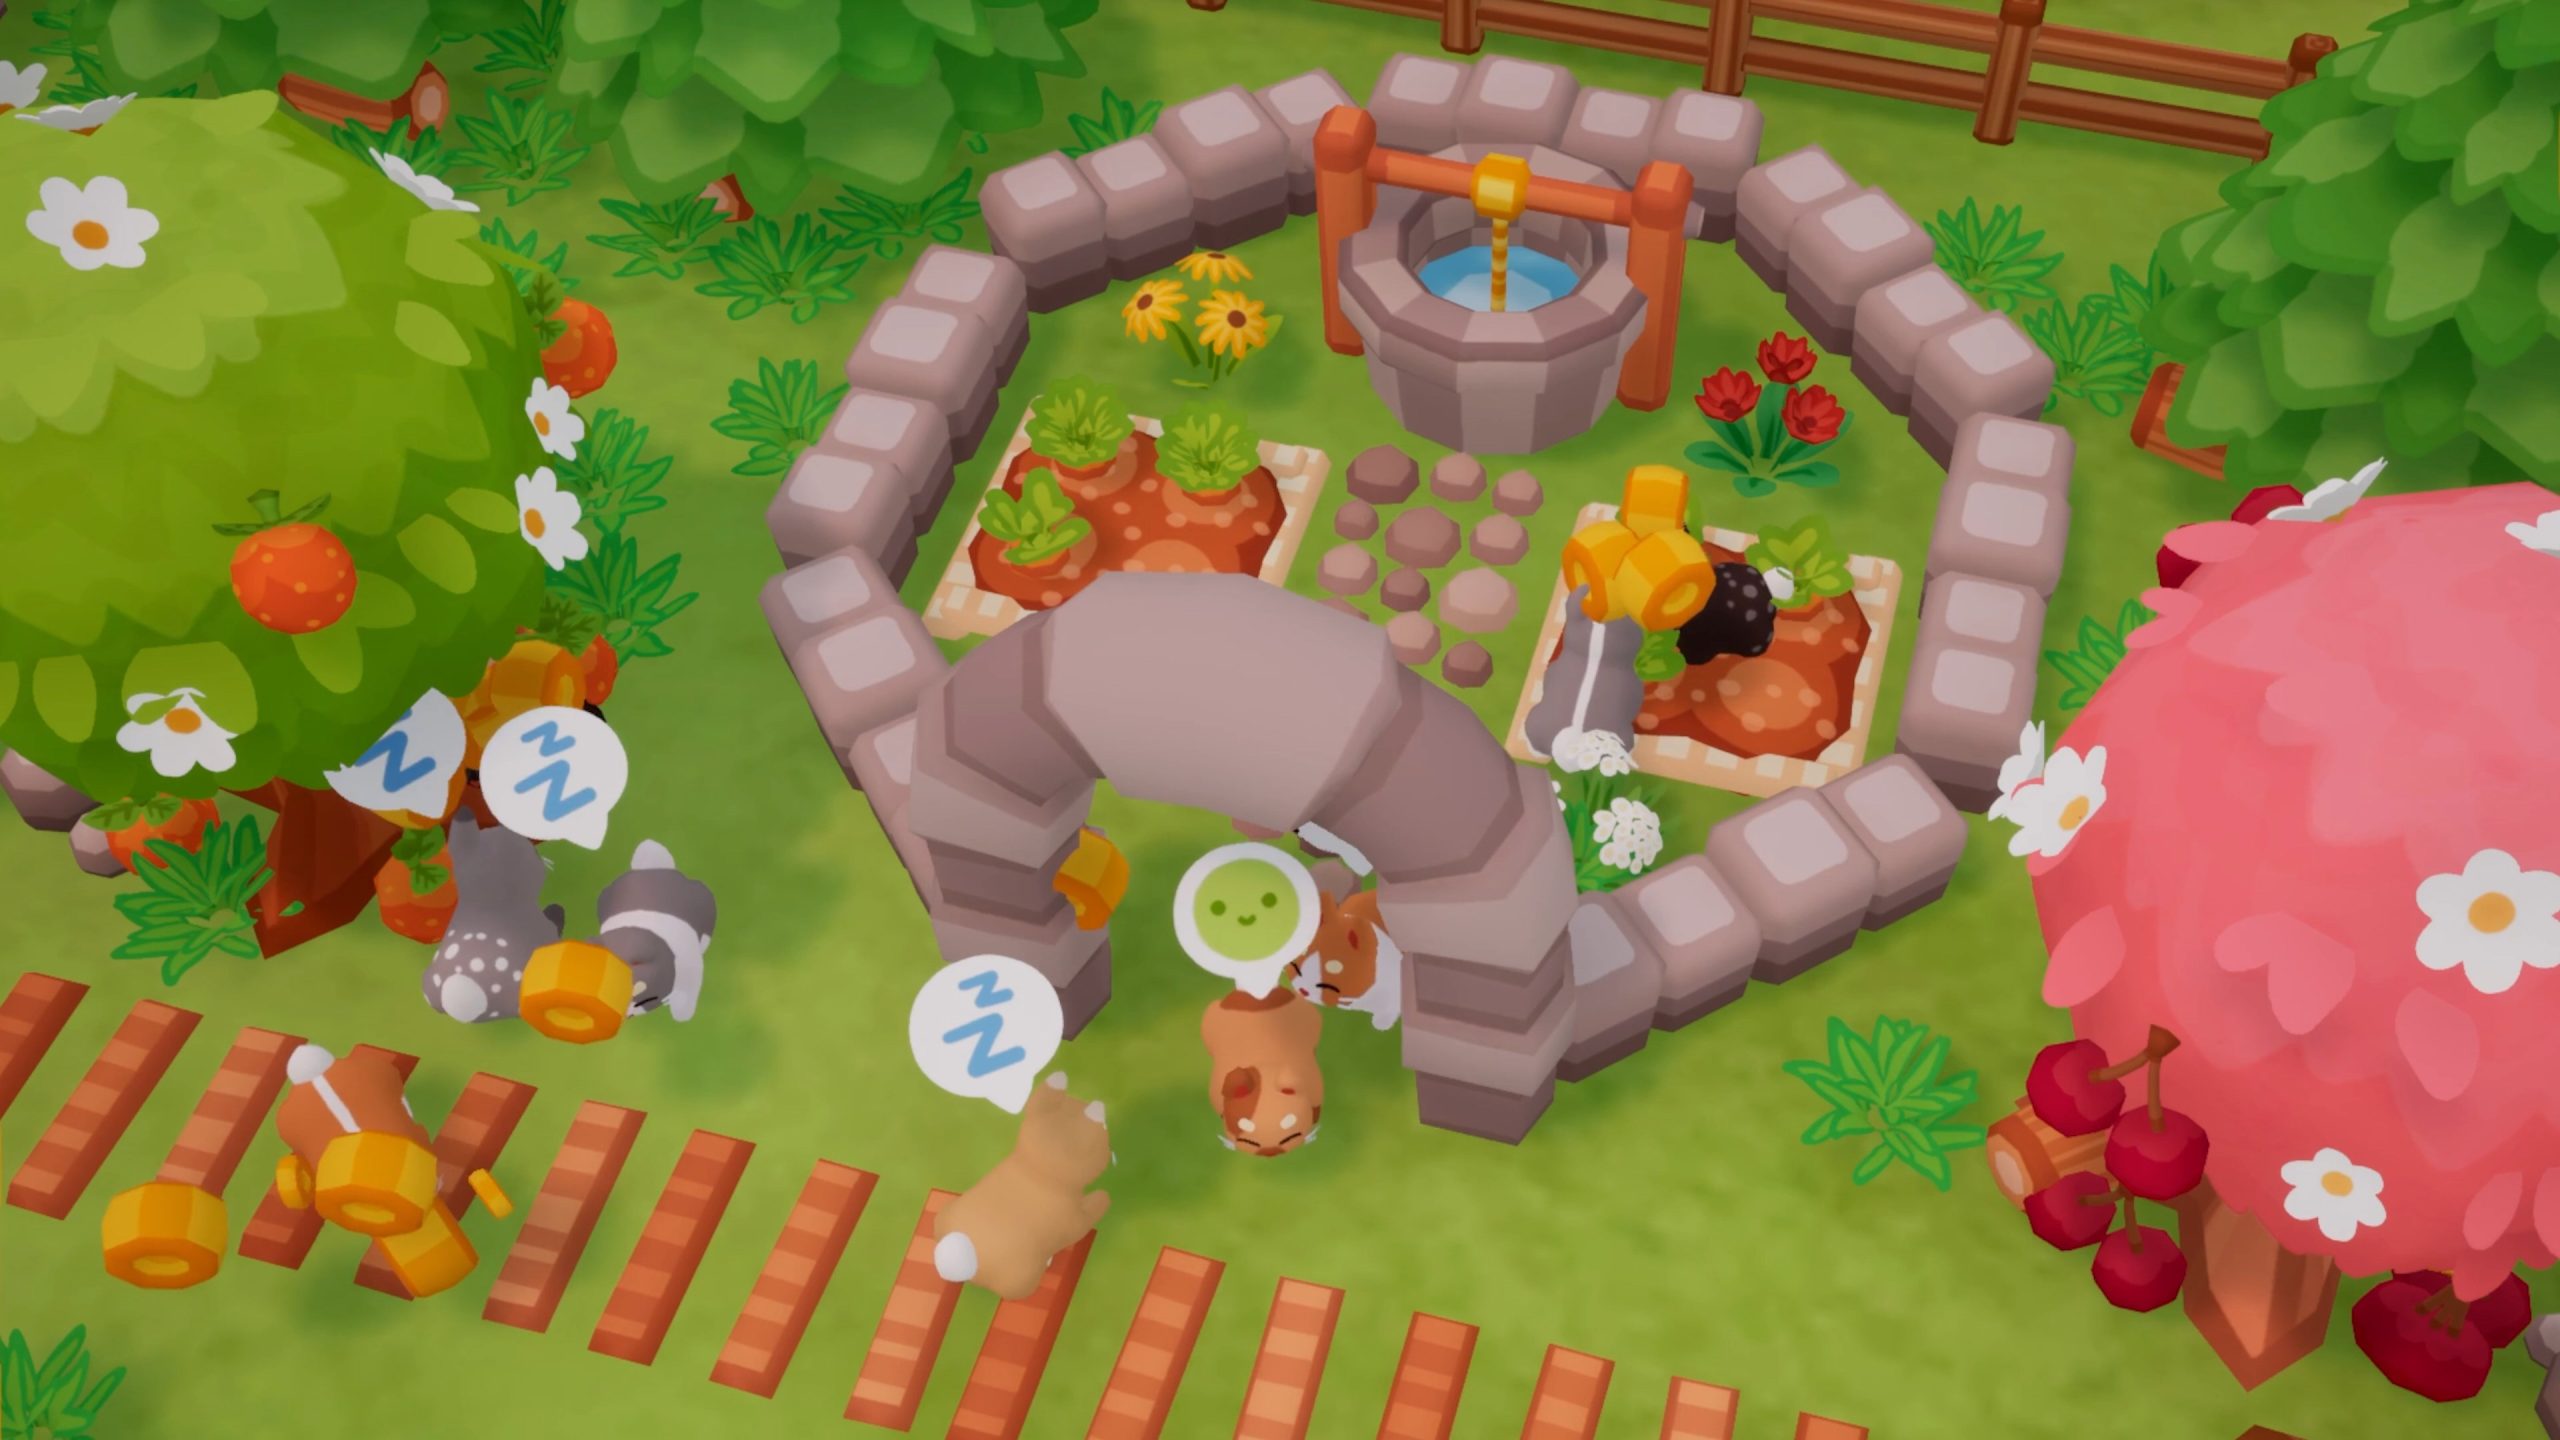 Open the finest Bunny Park on Xbox, PlayStation and Switch